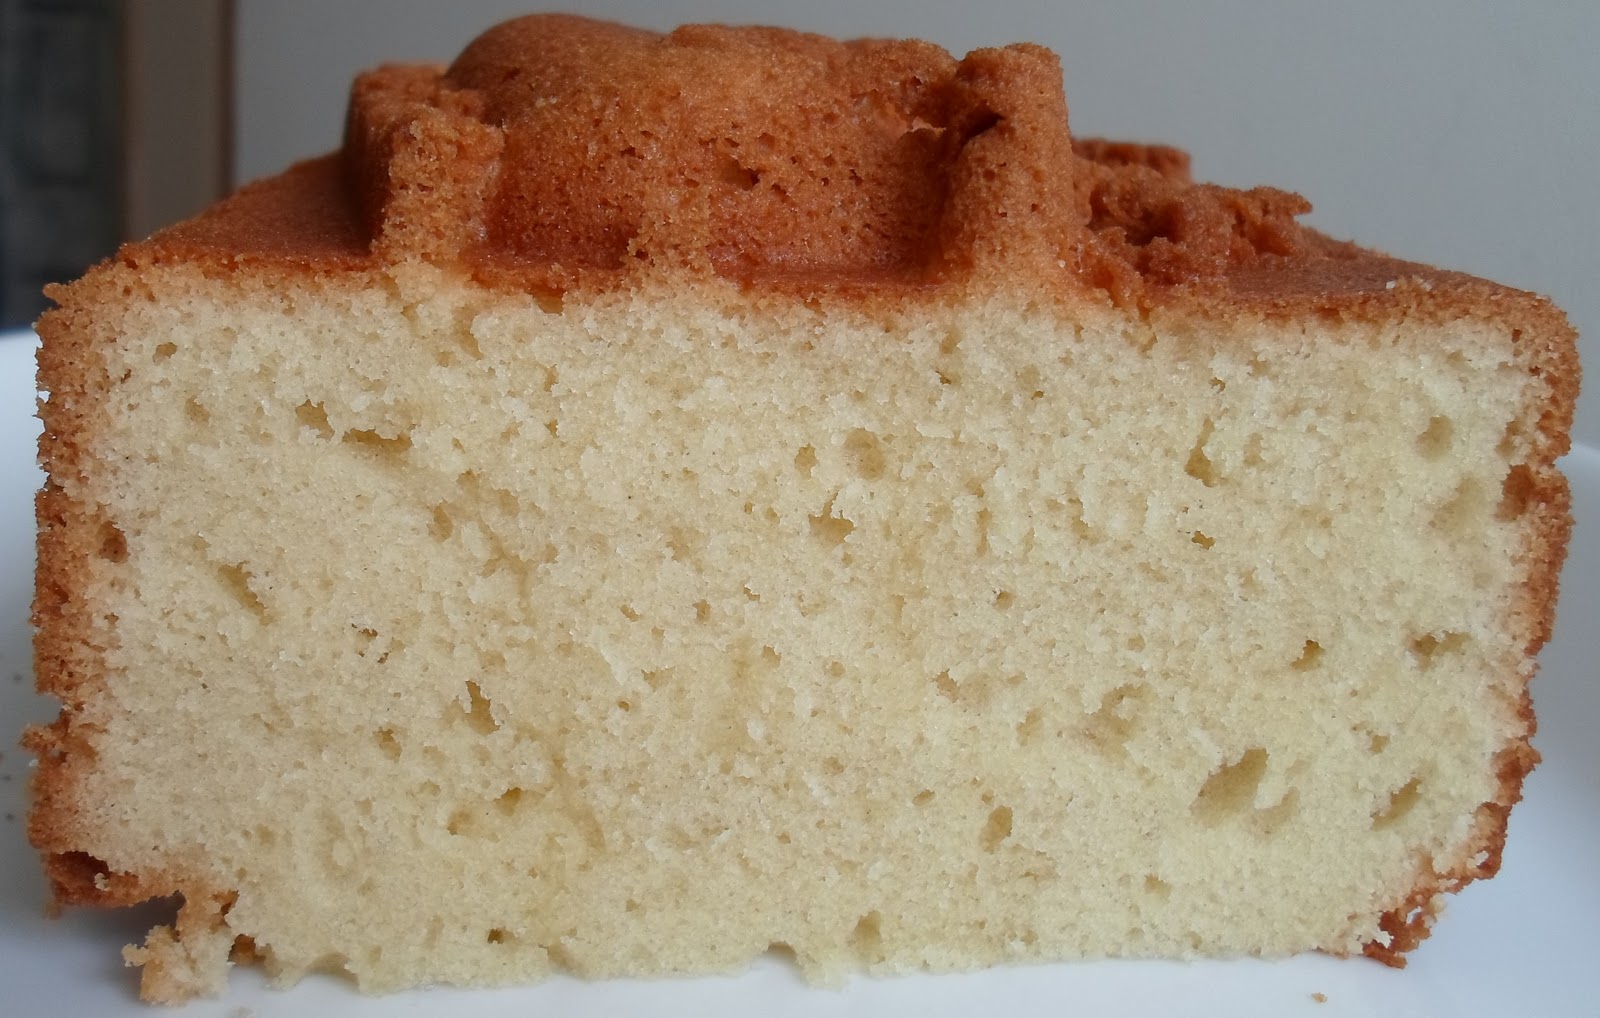 Happier Than A Pig In Mud: Cold Oven Pound Cake